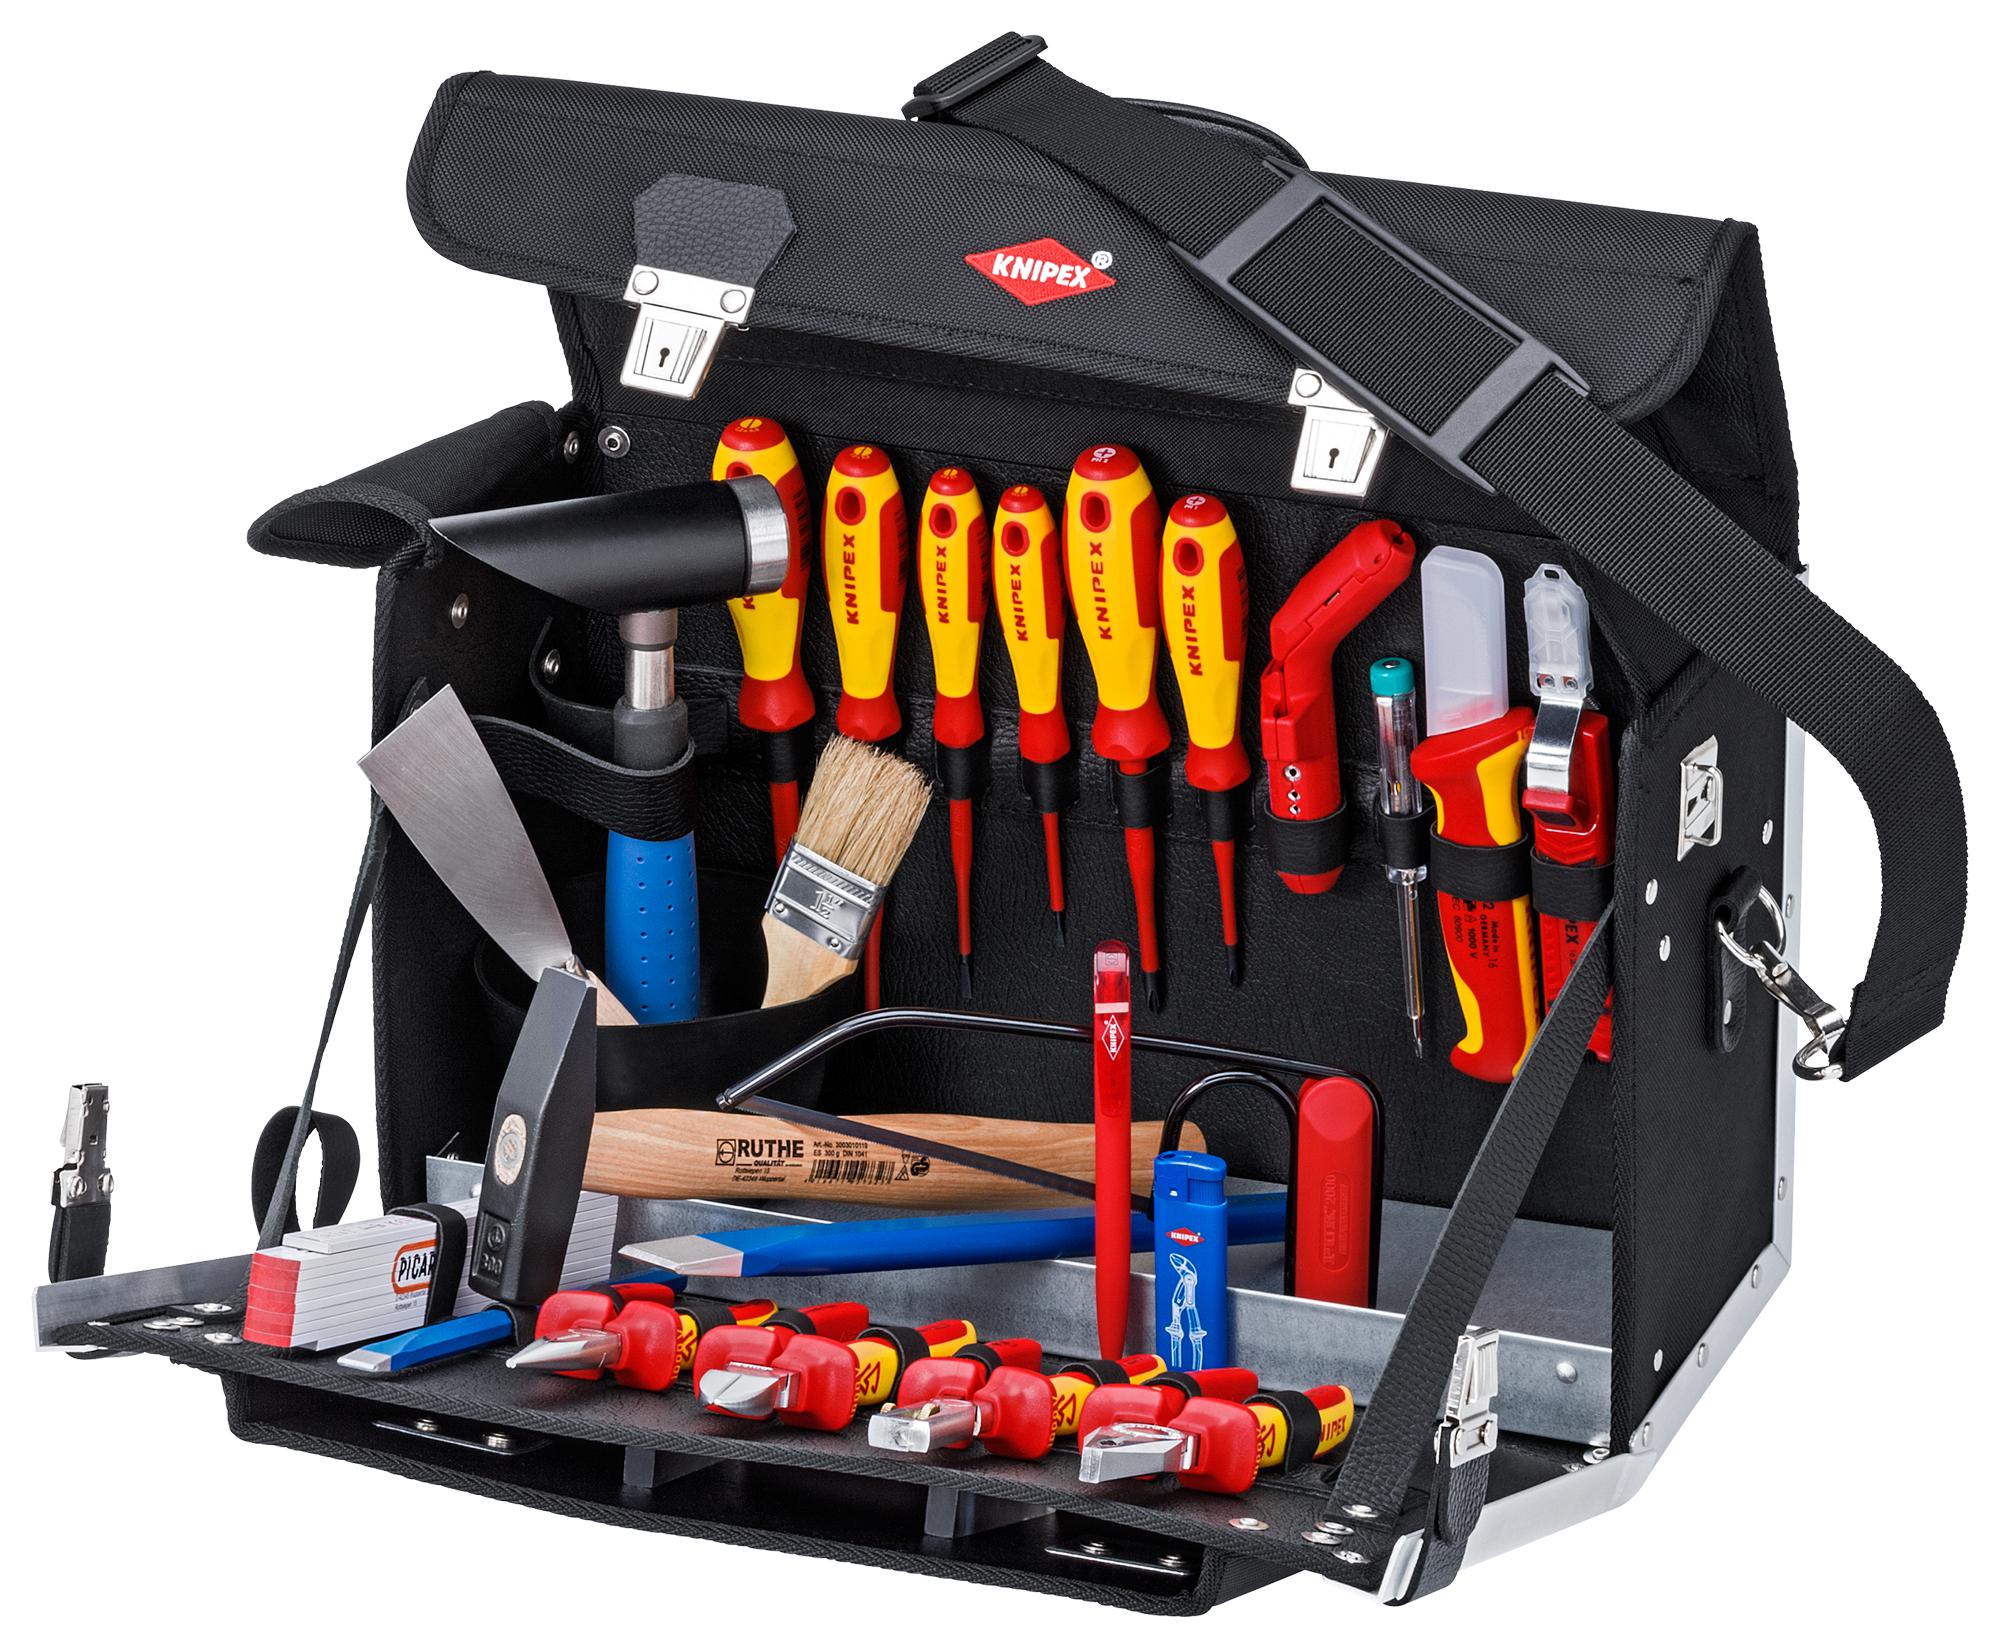 00 21 02 EL ELECTRICAL TOOL KIT, 23 PC KNIPEX